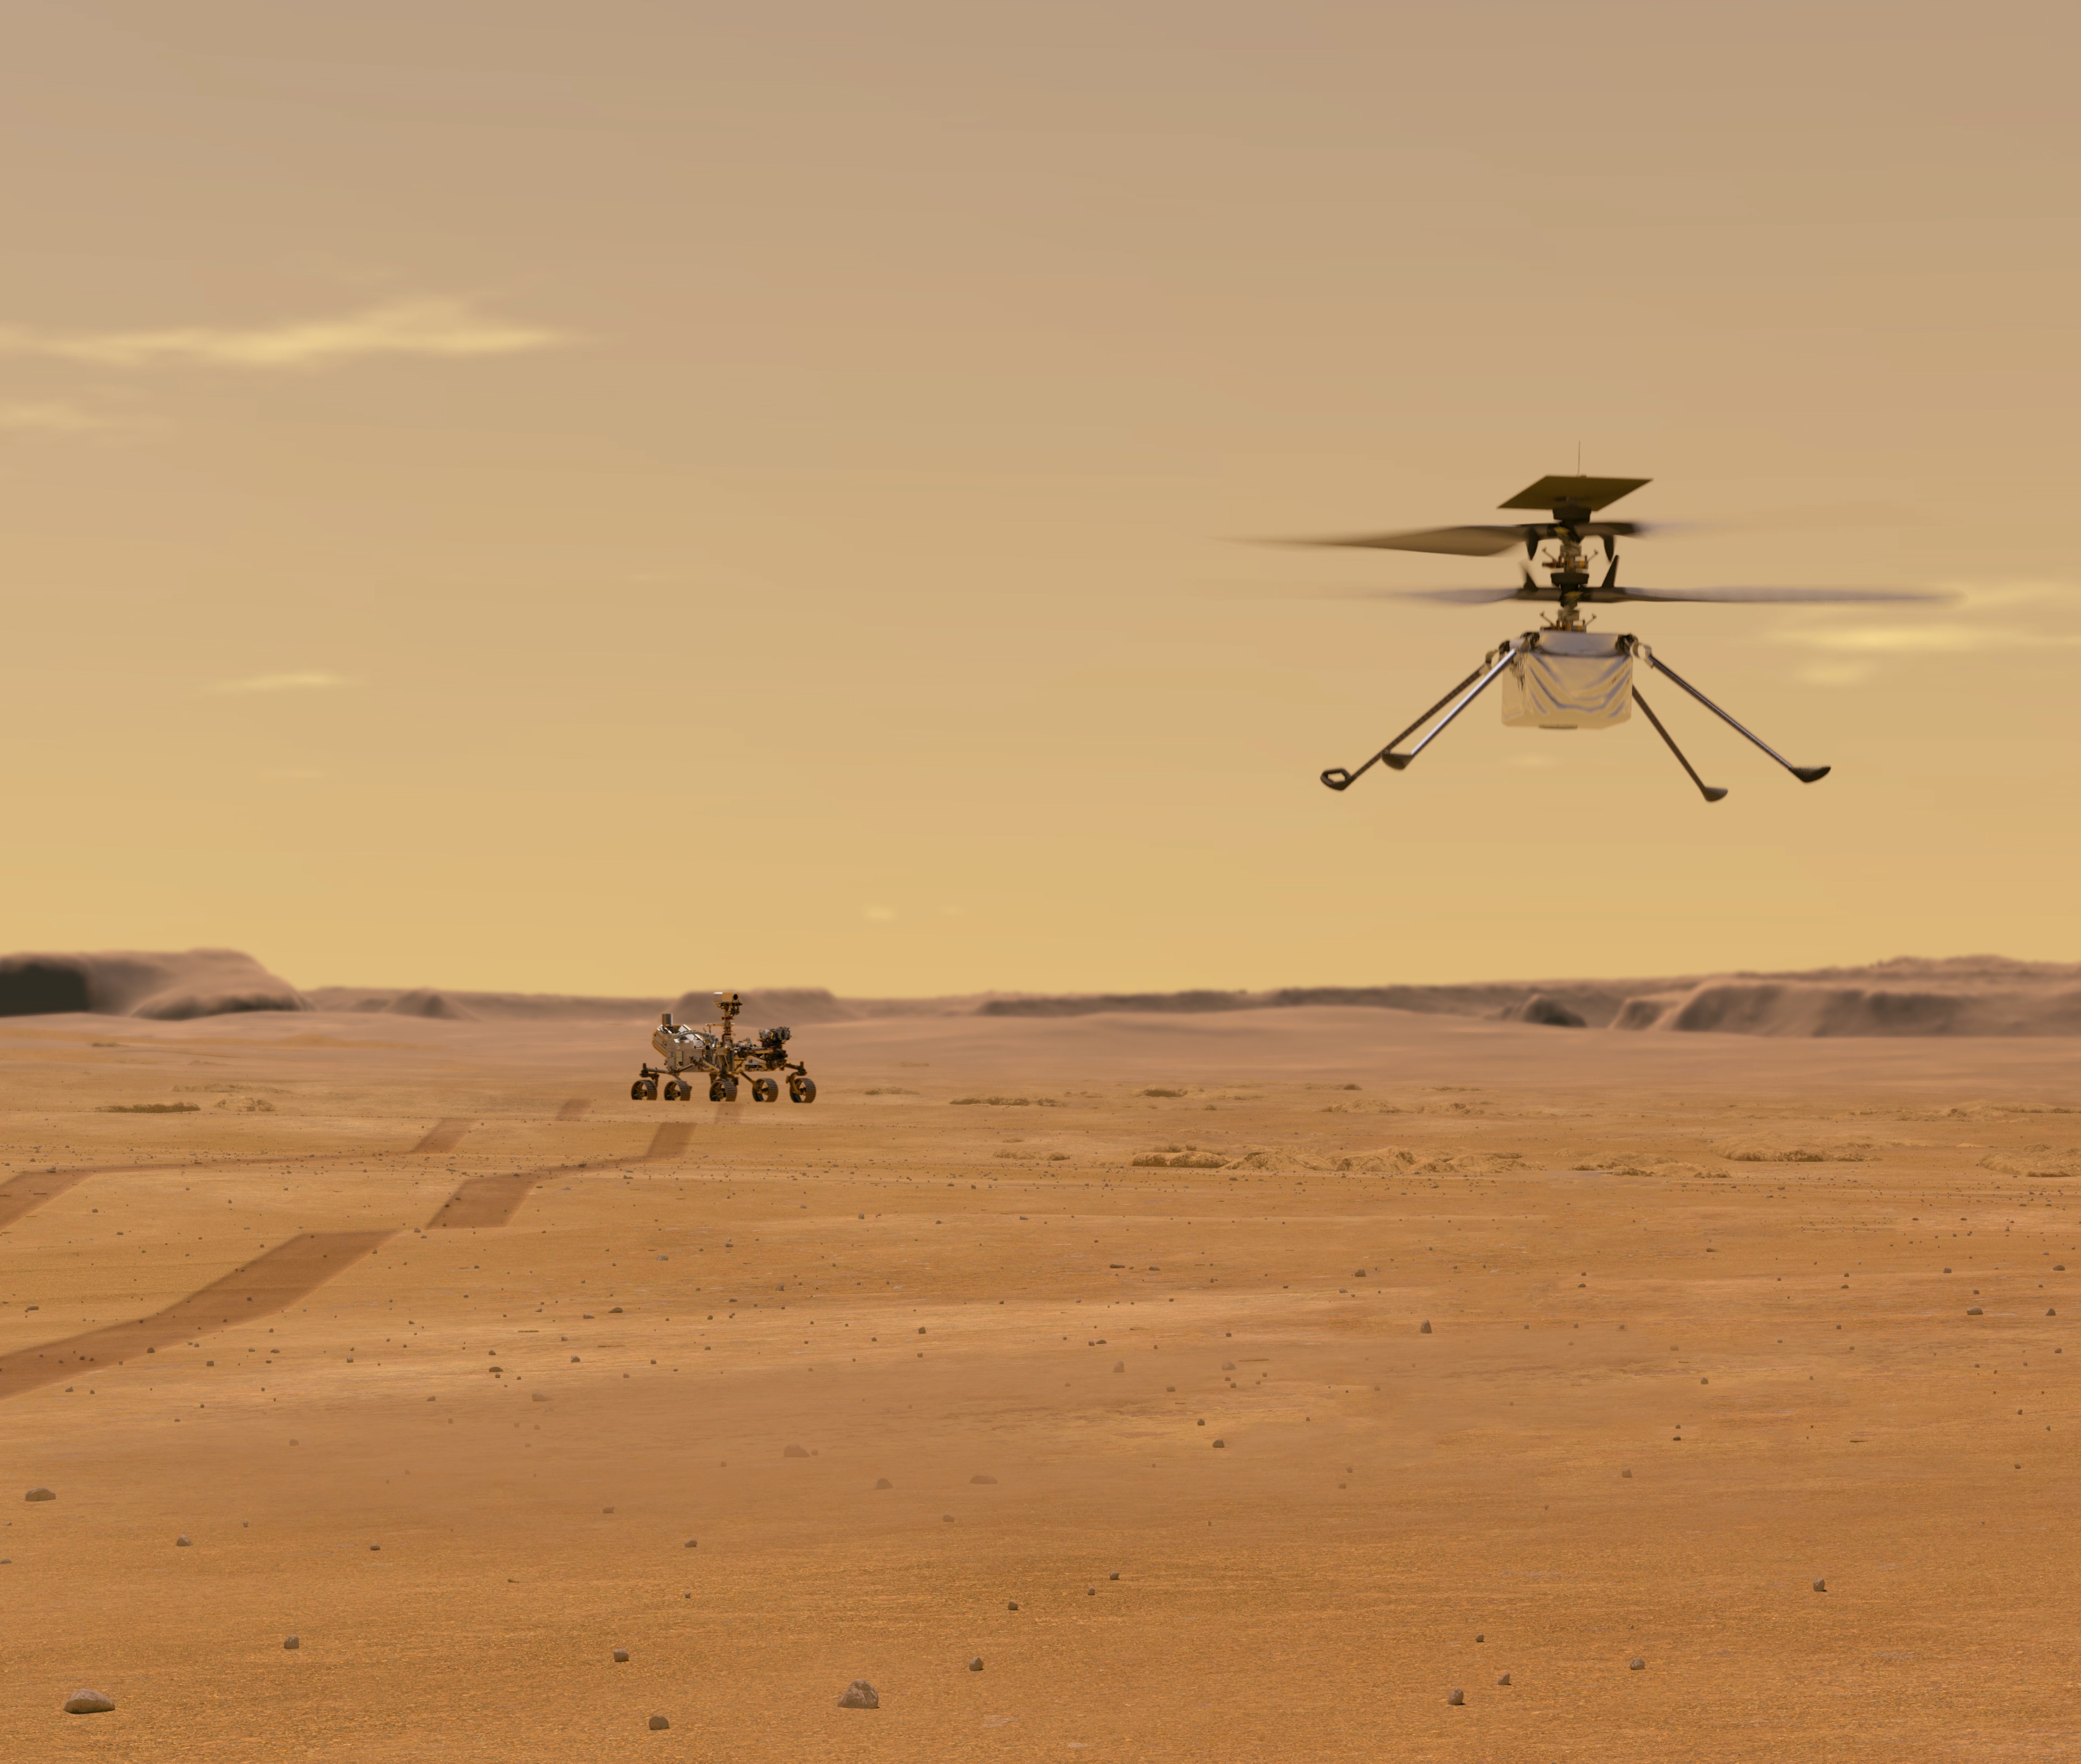 llustration of Mars Helicopter in flight over a flat Martian landscape, with the Perseverance rover in the distant background.